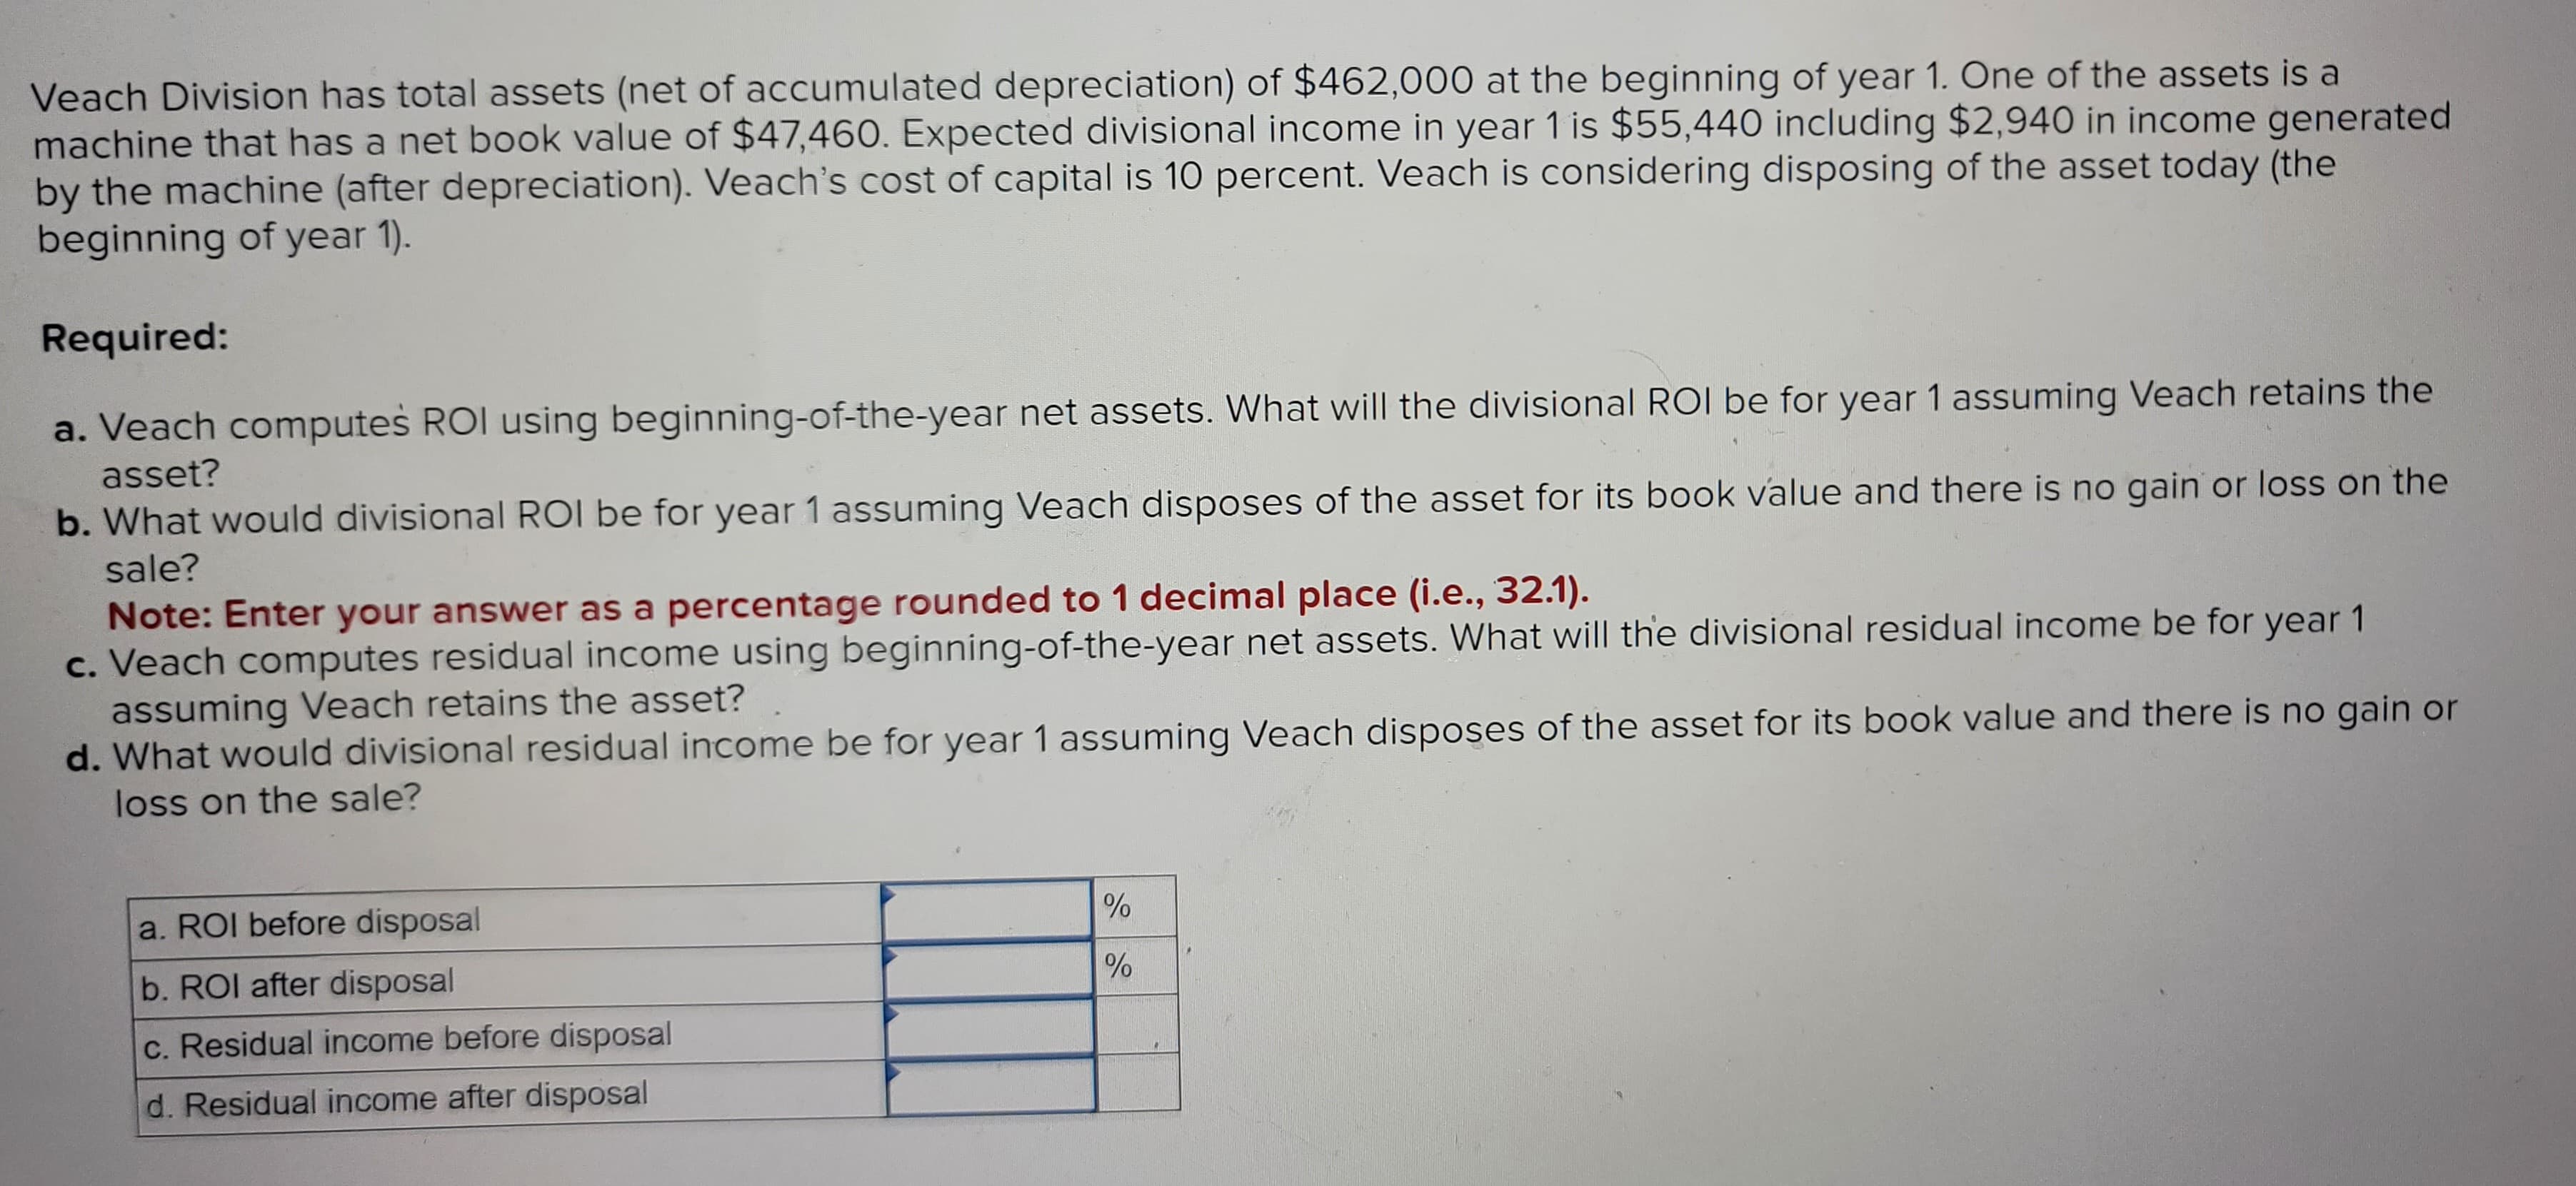 Veach Division has total assets (net of accumulated depreciation) of $462,000 at the beginning of year 1. One of the assets is a
machine that has a net book value of $47,460. Expected divisional income in year 1 is $55,440 including $2,940 in income generated
by the machine (after depreciation). Veach's cost of capital is 10 percent. Veach is considering disposing of the asset today (the
beginning of year 1).
Required:
a. Veach computes ROI using beginning-of-the-year net assets. What will the divisional ROI be for year 1 assuming Veach retains the
asset?
b. What would divisional ROI be for year 1 assuming Veach disposes of the asset for its book value and there is no gain or loss on the
sale?
Note: Enter your answer as a percentage rounded to 1 decimal place (i.e., 32.1).
c. Veach computes residual income using beginning-of-the-year net assets. What will the divisional residual income be for year 1
assuming Veach retains the asset?
d. What would divisional residual income be for year 1 assuming Veach disposes of the asset for its book value and there is no gain or
loss on the sale?
a. ROI before disposal
b. ROI after disposal
c. Residual income before disposal
d. Residual income after disposal
%
%